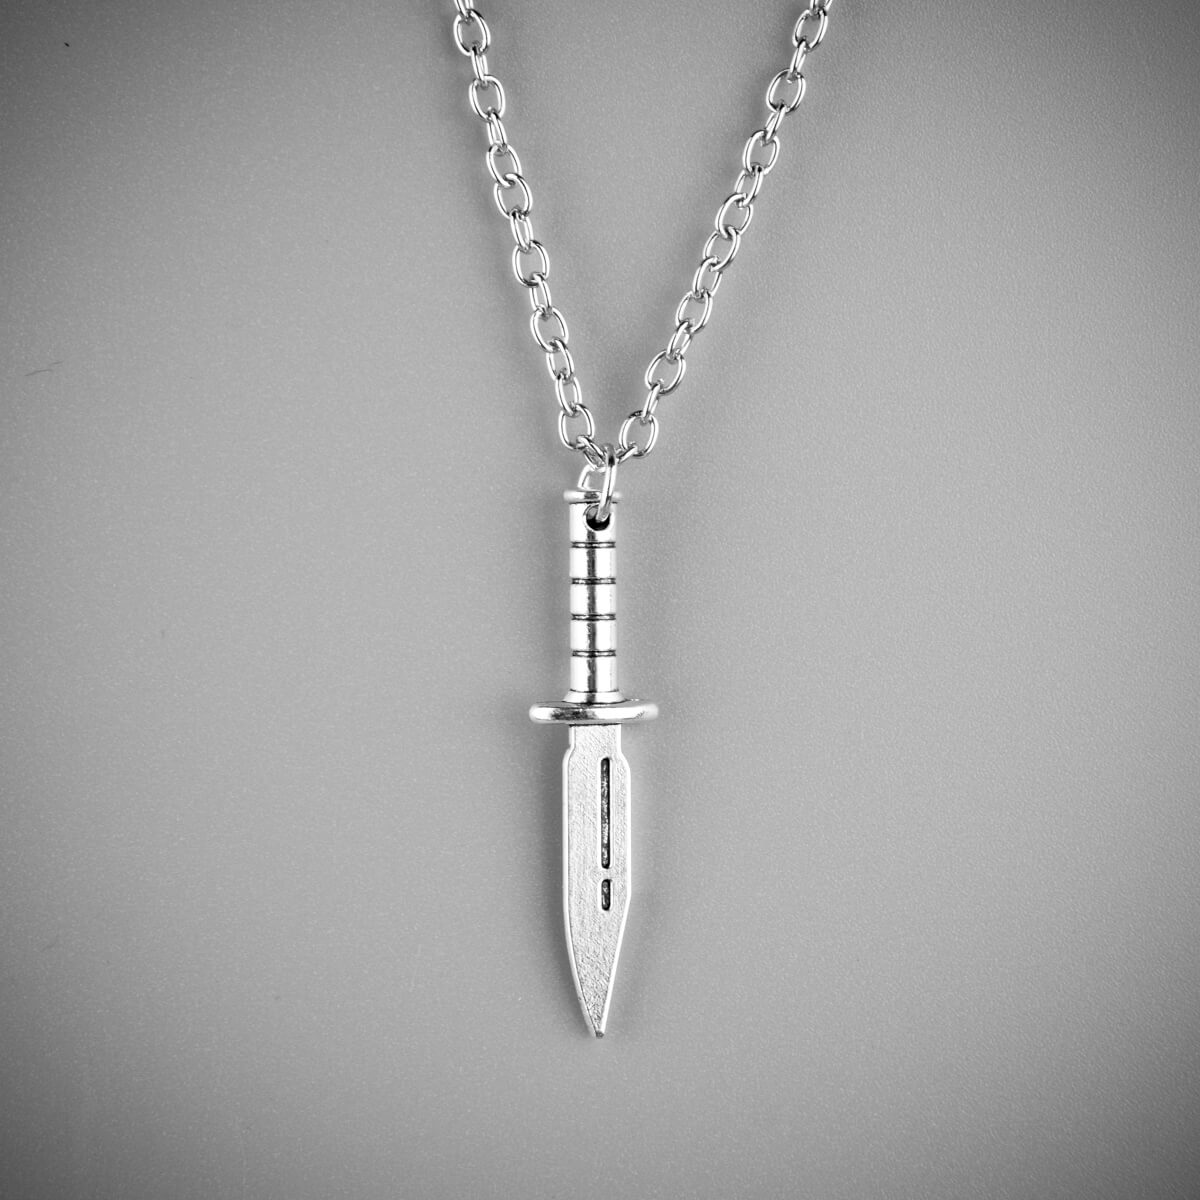 SMALL SILVER DAGGER NECKLACE - PACK OF 5